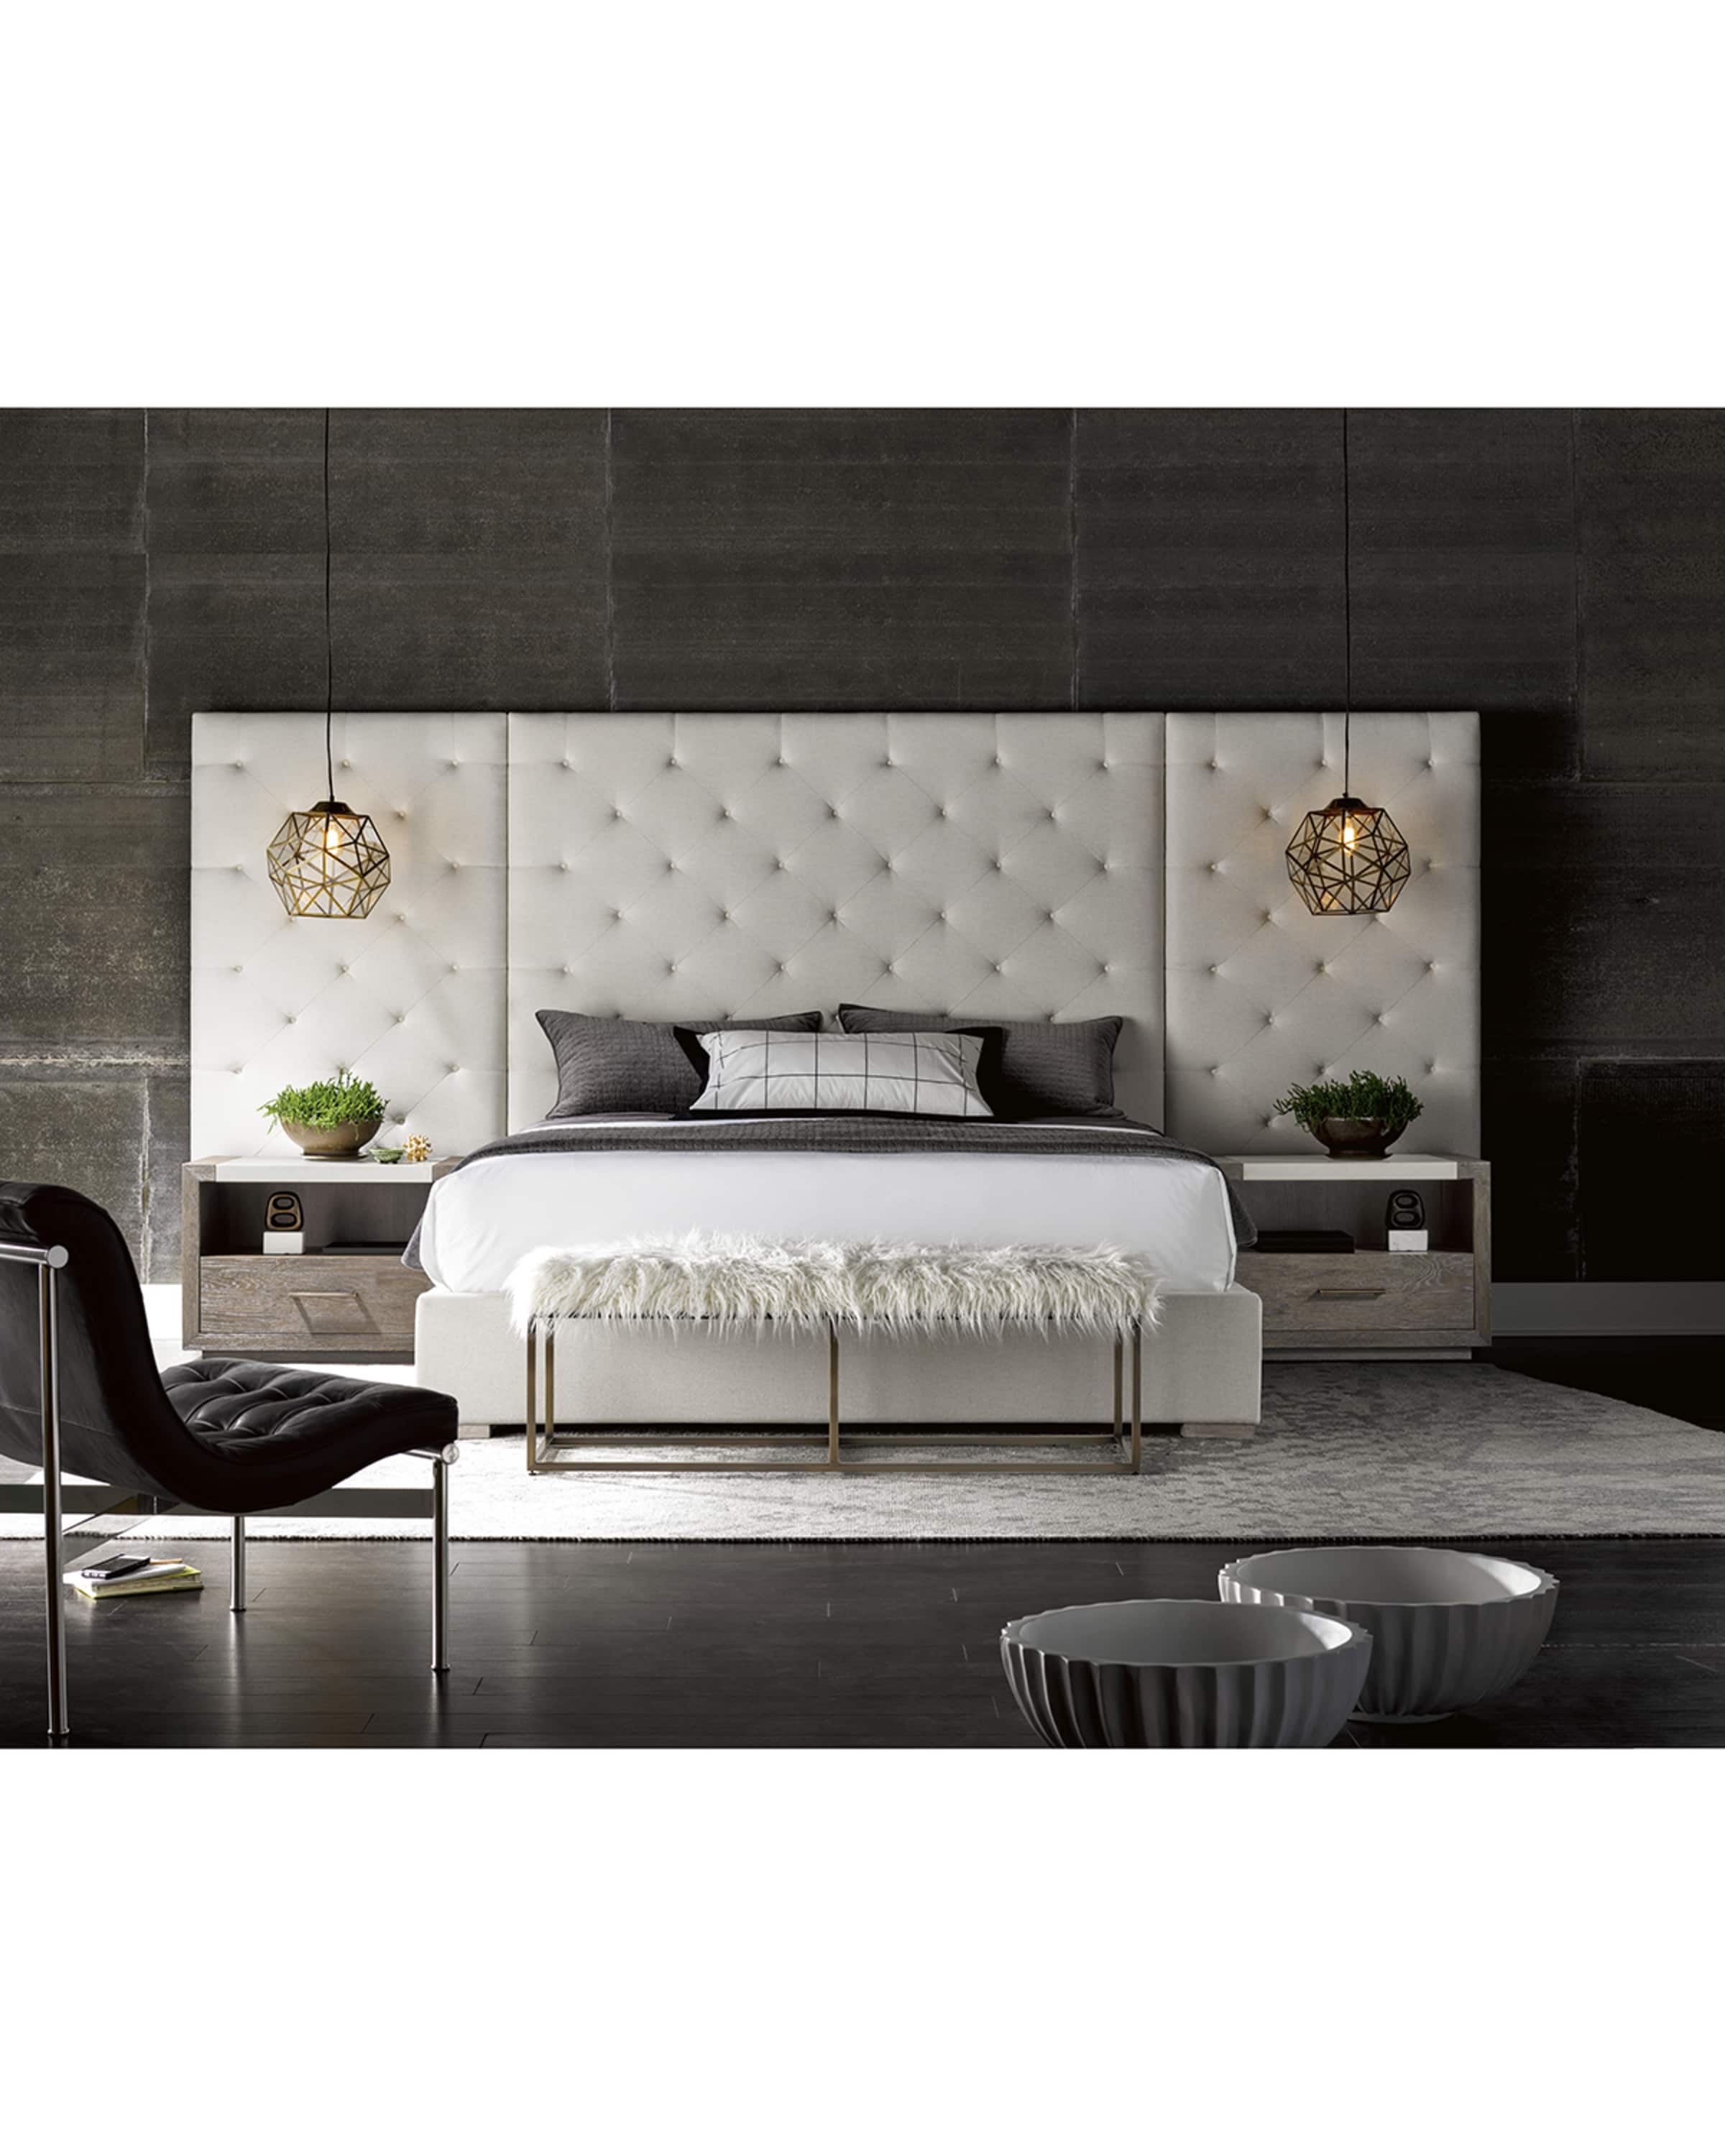 Universal Furniture Parigi Tufted King Bed with Panels